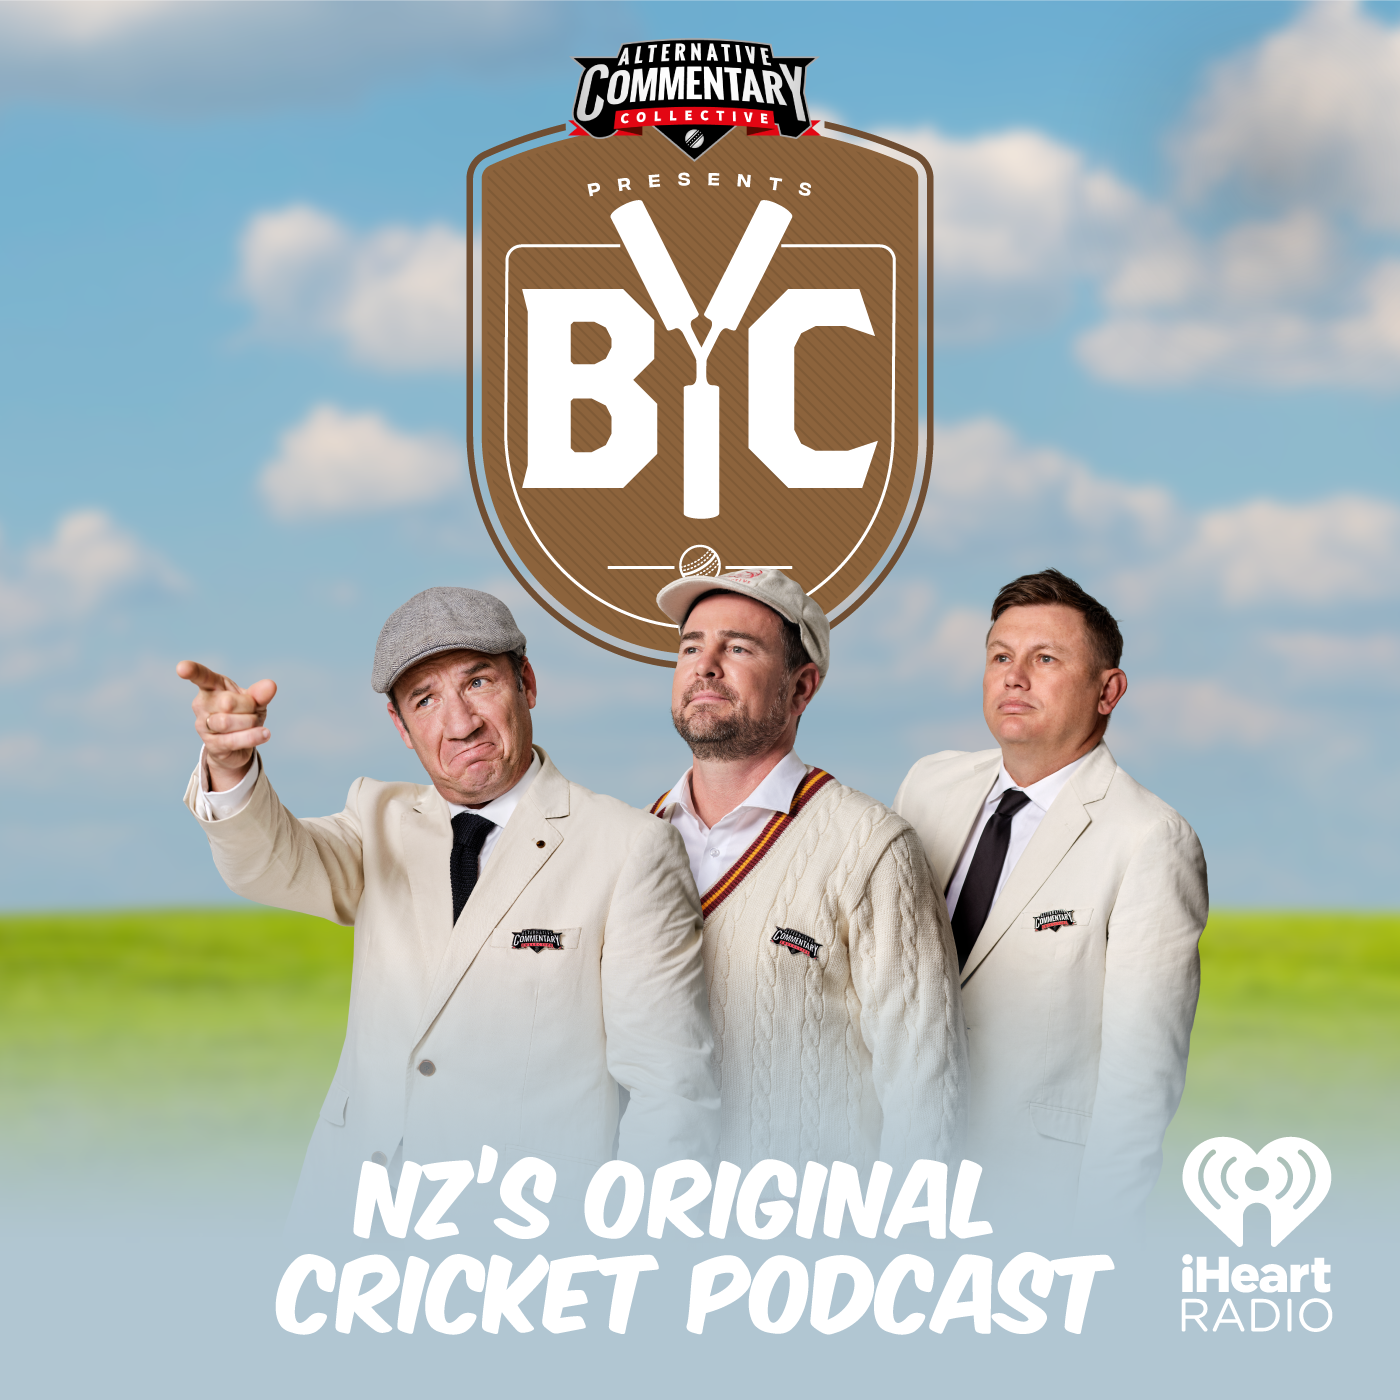 "NZ Vs Eng 2nd Test Special - Notes From The Basin: Day 2"